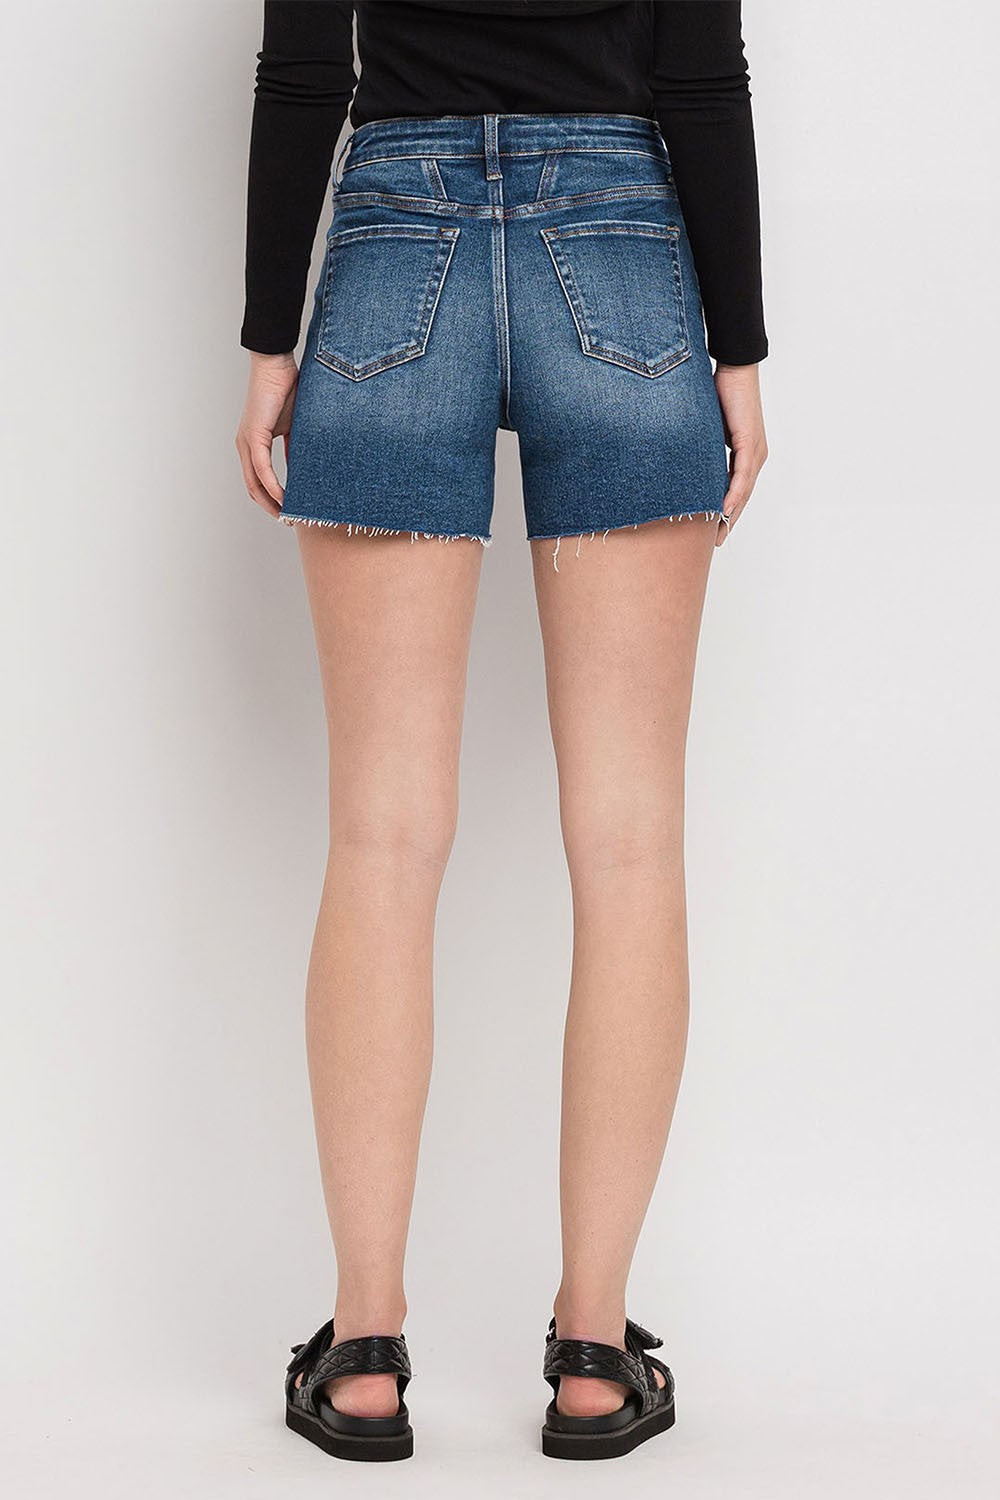 High Rise Patched Button Fly Shorts by Vervet